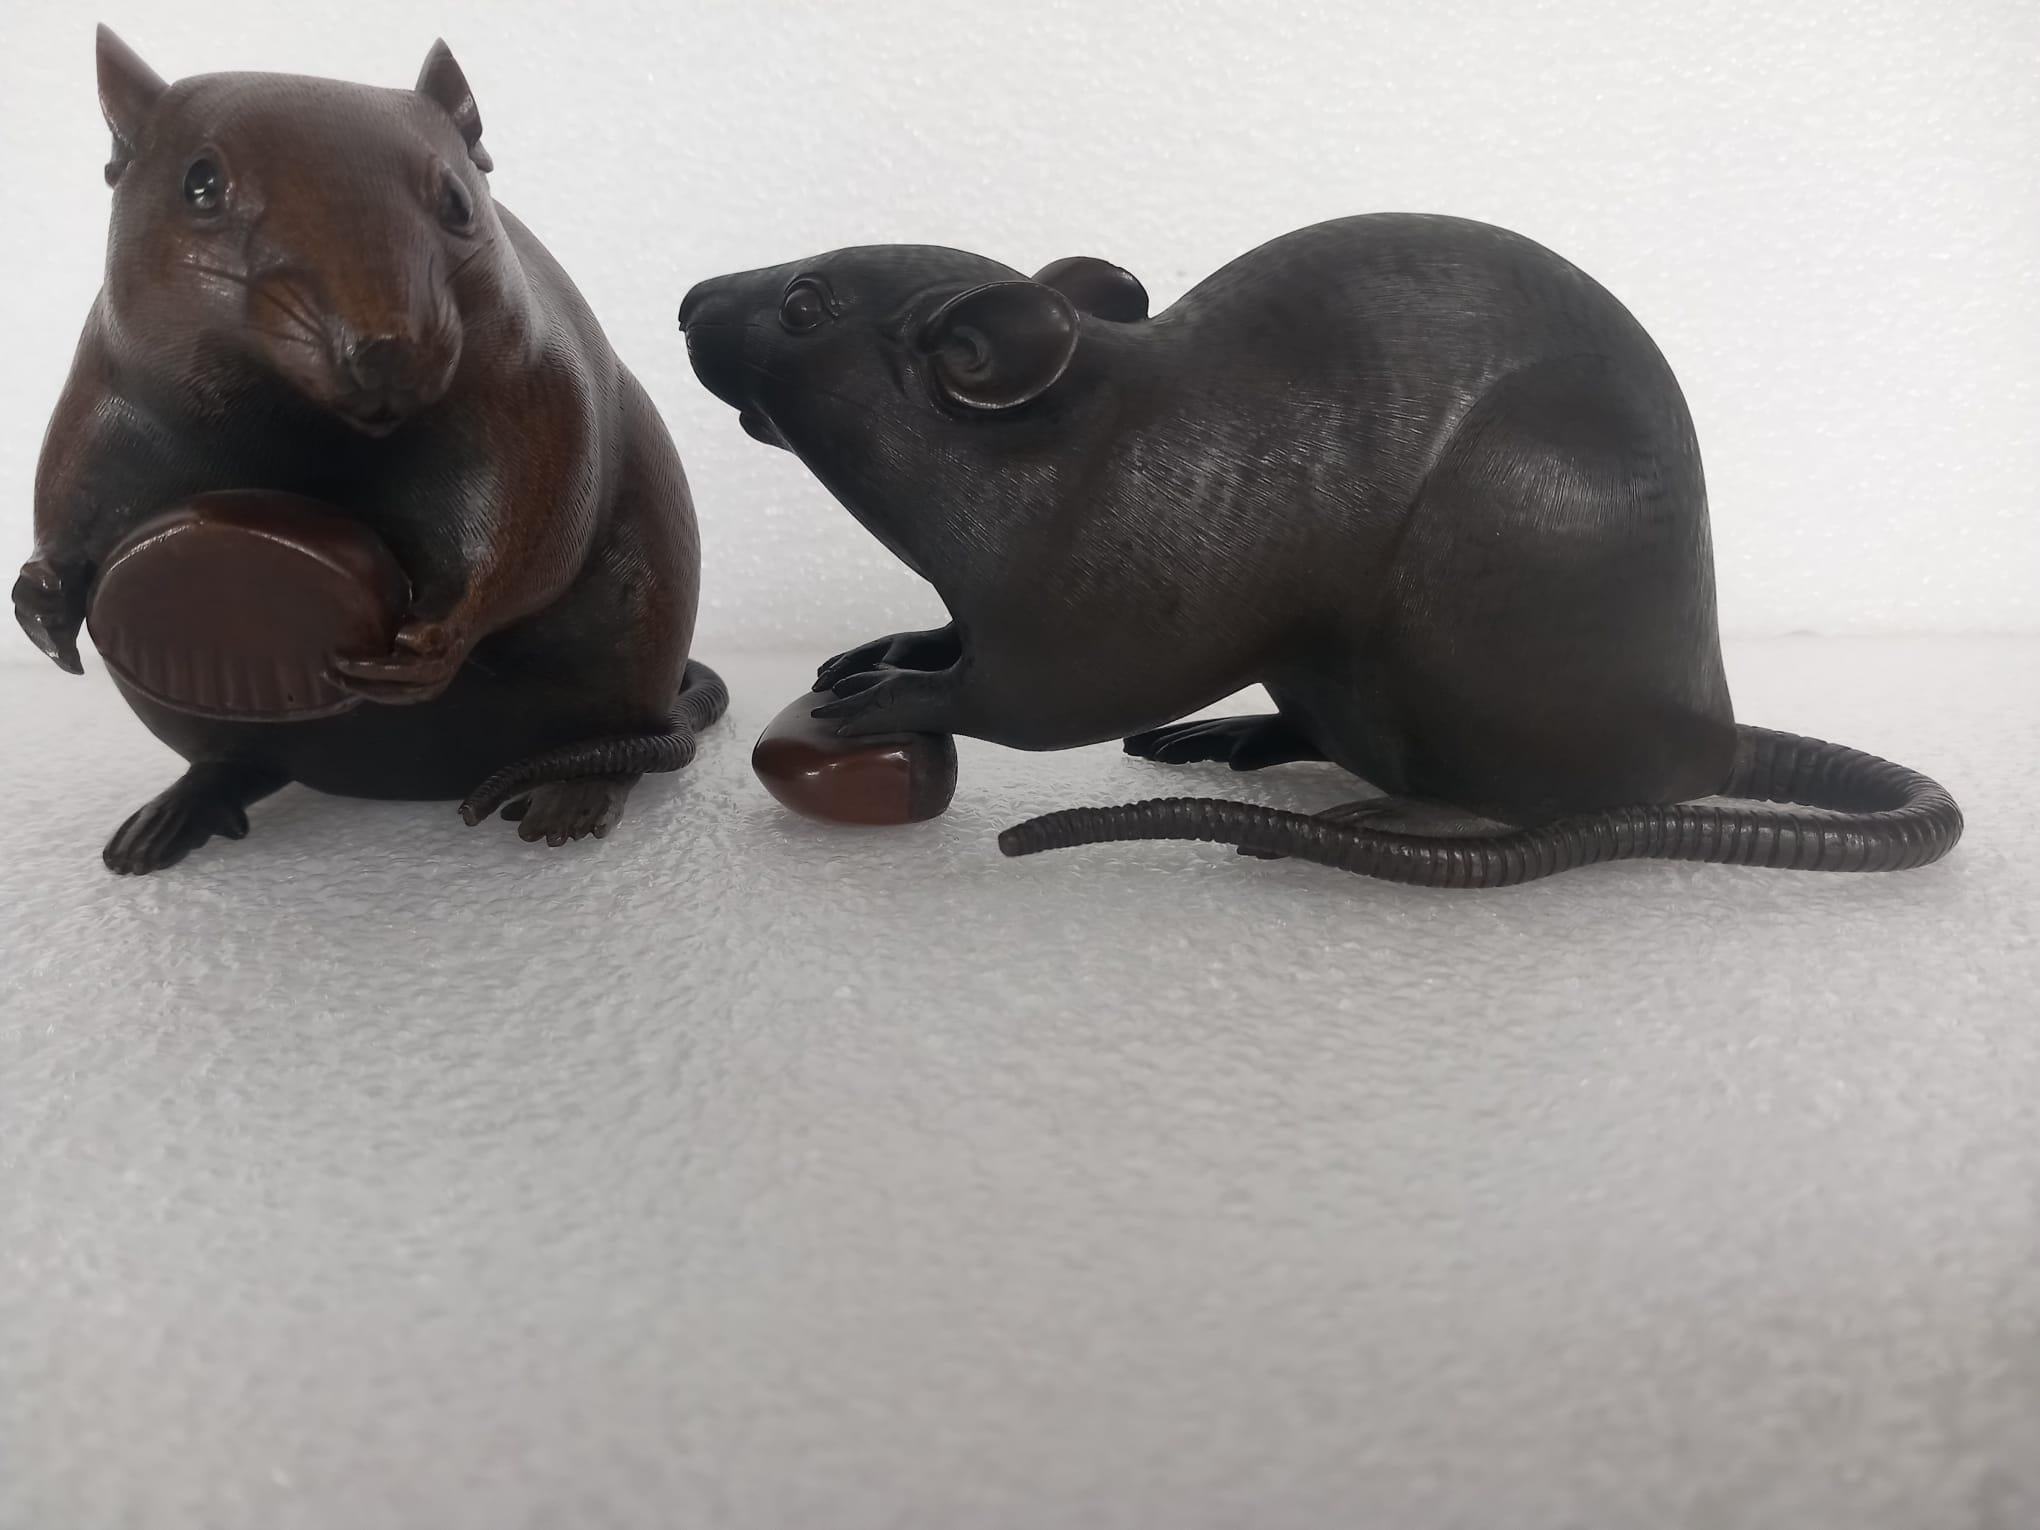 Set contains two: A Japanese bronze of a rat, Meiji Period, signed, approximately 9cm long x 8cm high and another Japanese bronze of a rat, signed, seated on its back legs, brown patina, approximately 17cm long x 9.5cm high 

A Japanese bronze model